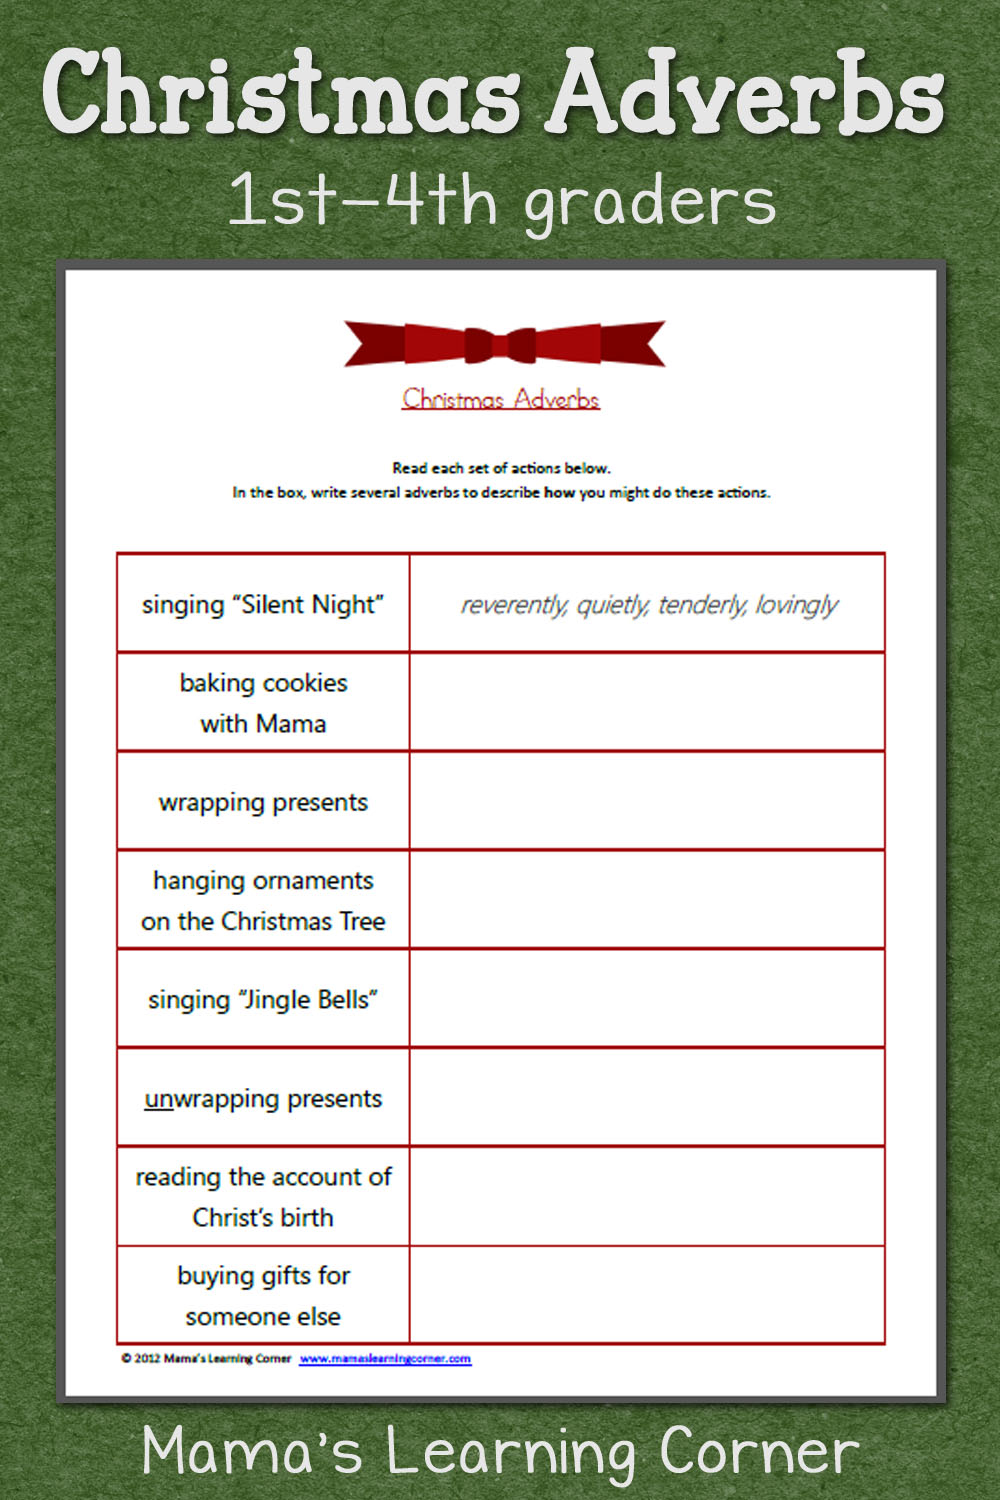 Christmas Adverbs: Free Worksheet for 1st-4th graders